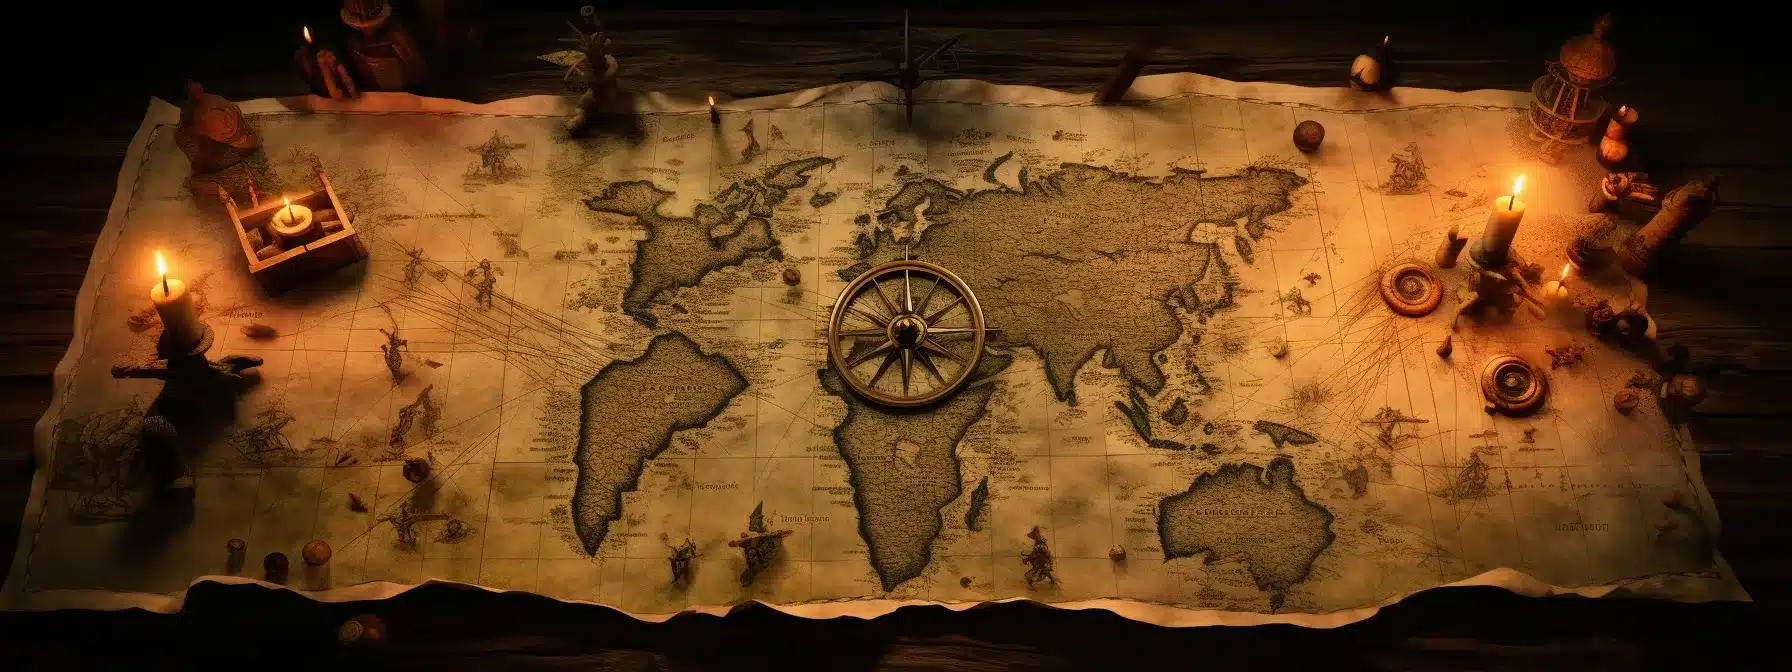 A Hand-Drawn Treasure Map With Navigational Compasses And Waypoints Symbolizing Brand Strategy And Growth.